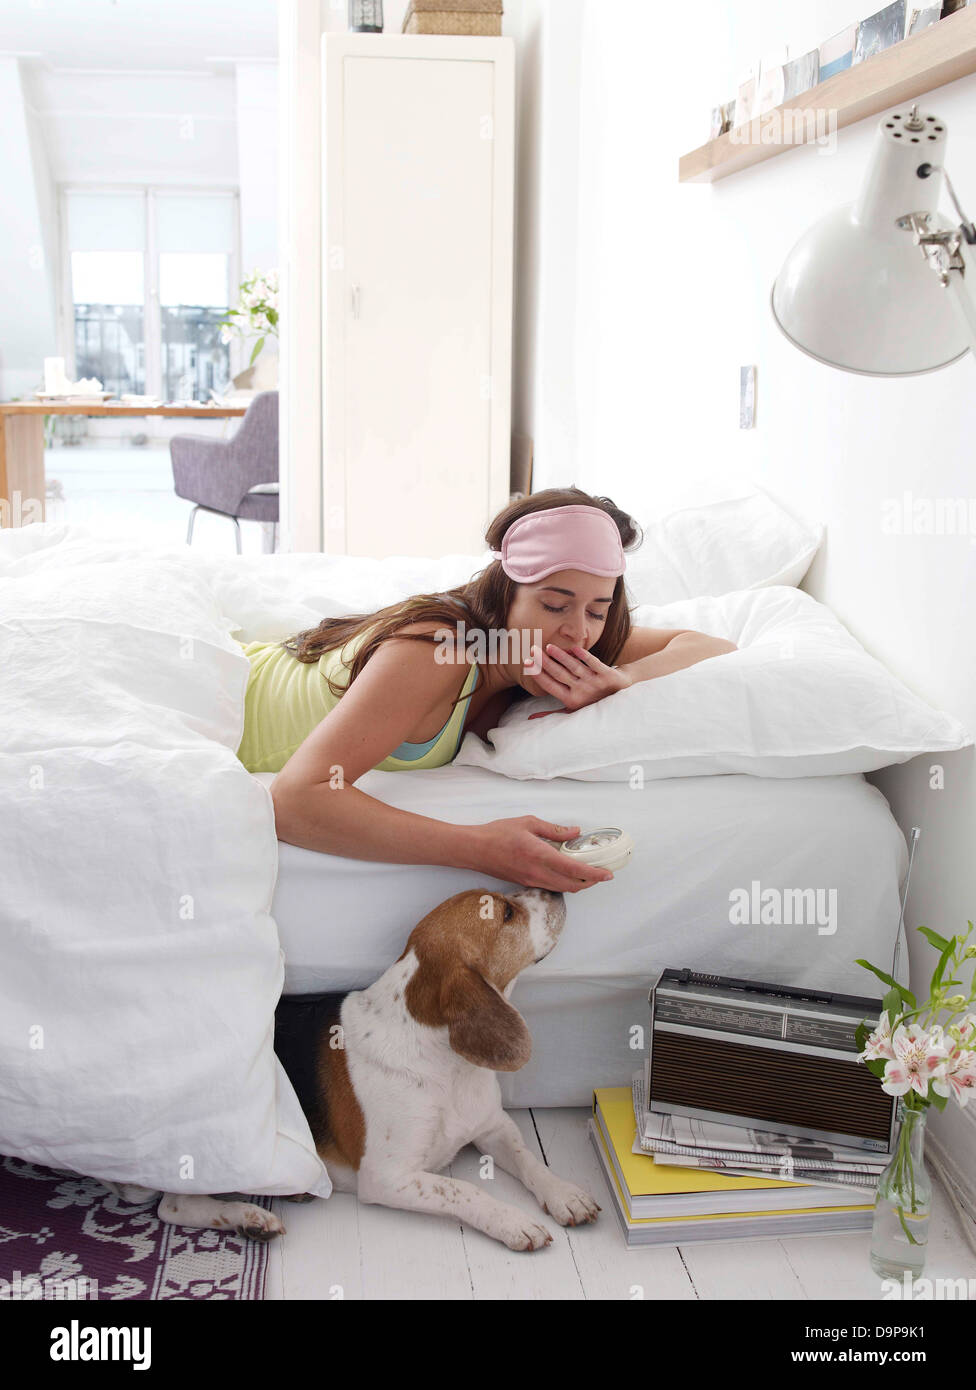 Brunette young woman lying in bed Stock Photo